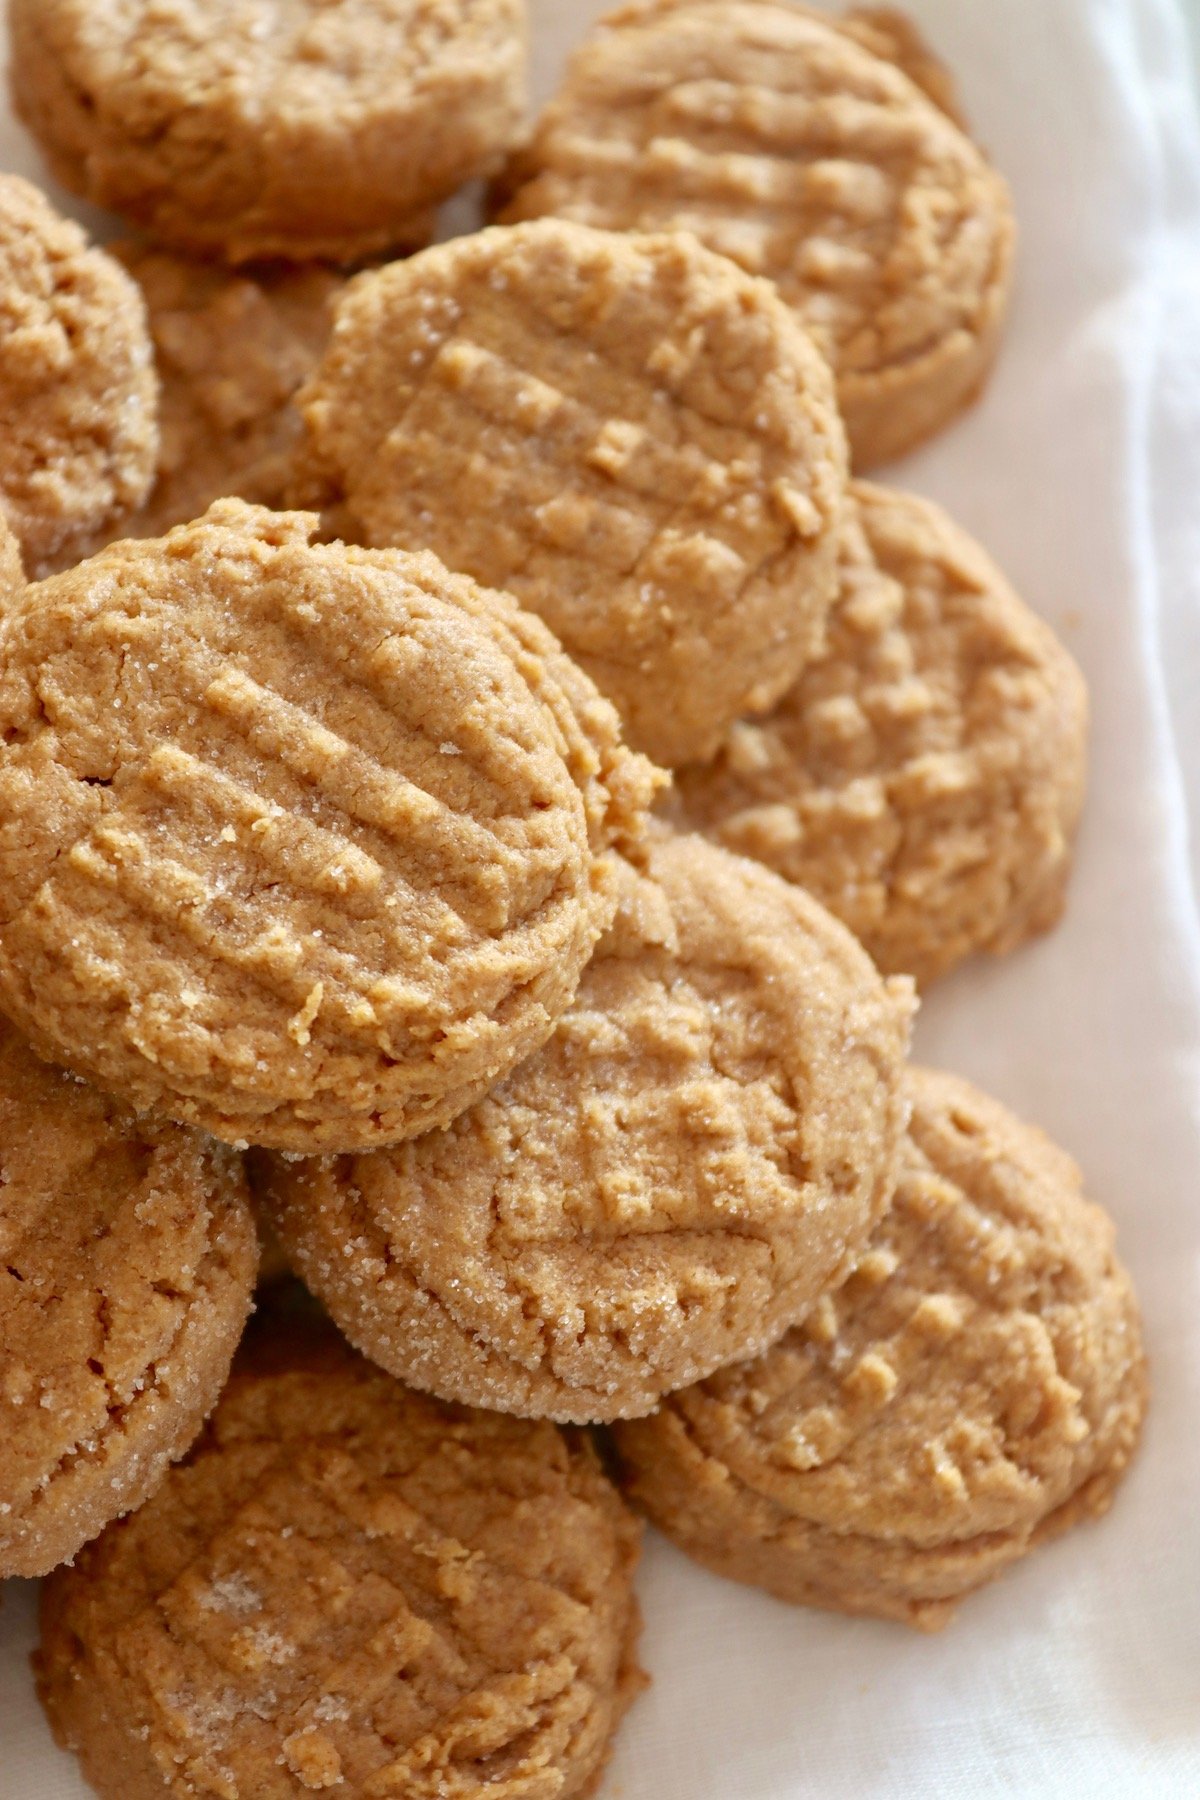 Pile of peanut butter cookies with a fork indentation in each one.